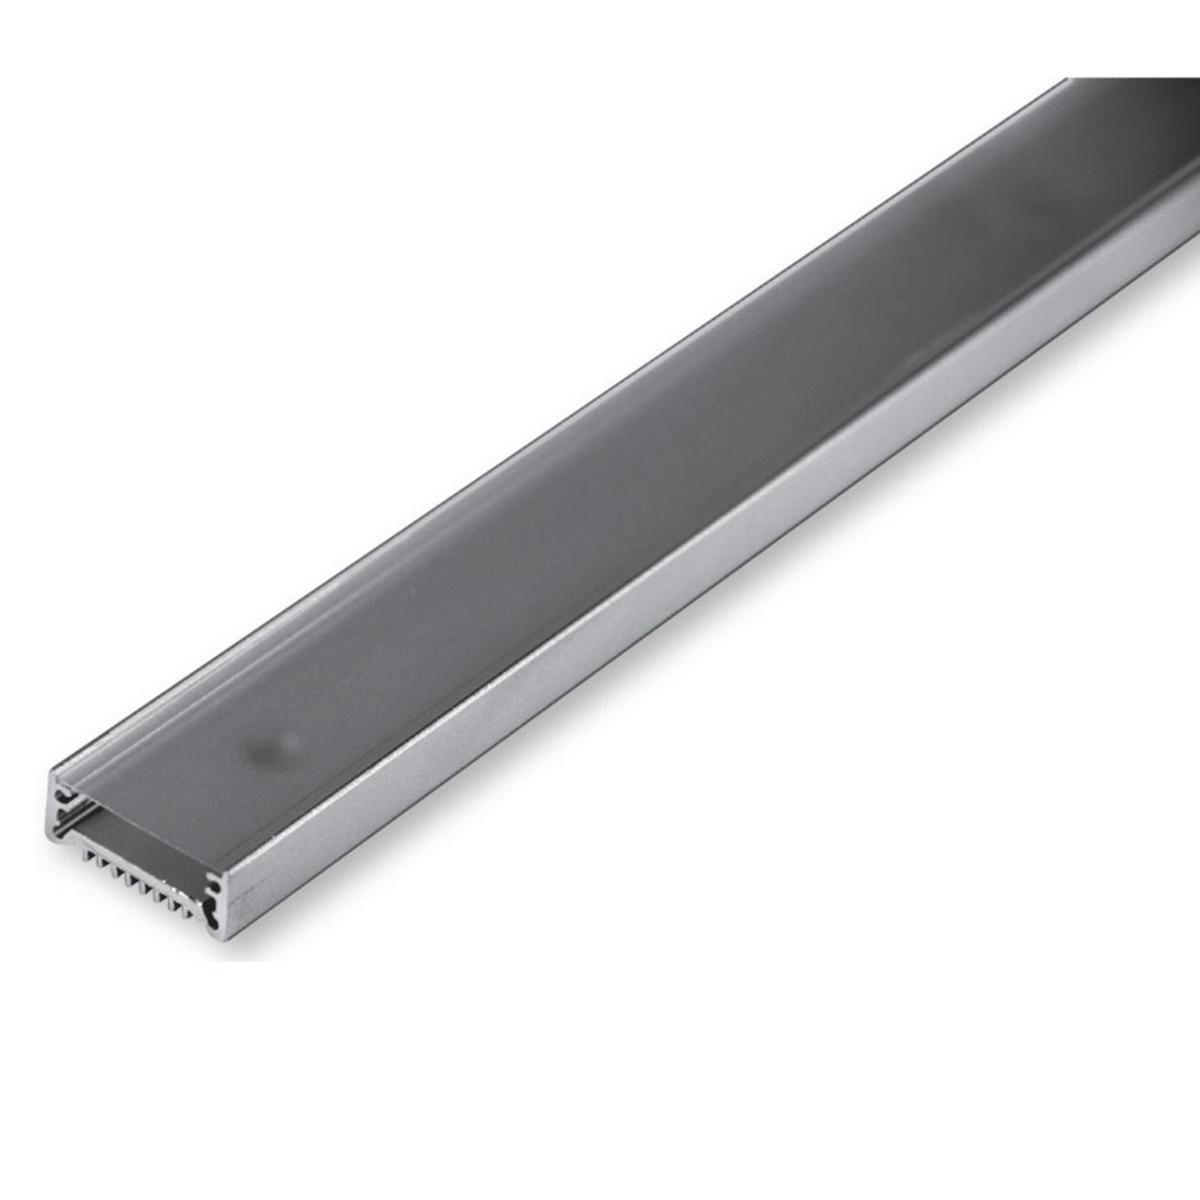 4ft Wide Aluminum Extruded Channel for for LTR LED Strip and Tape Lights